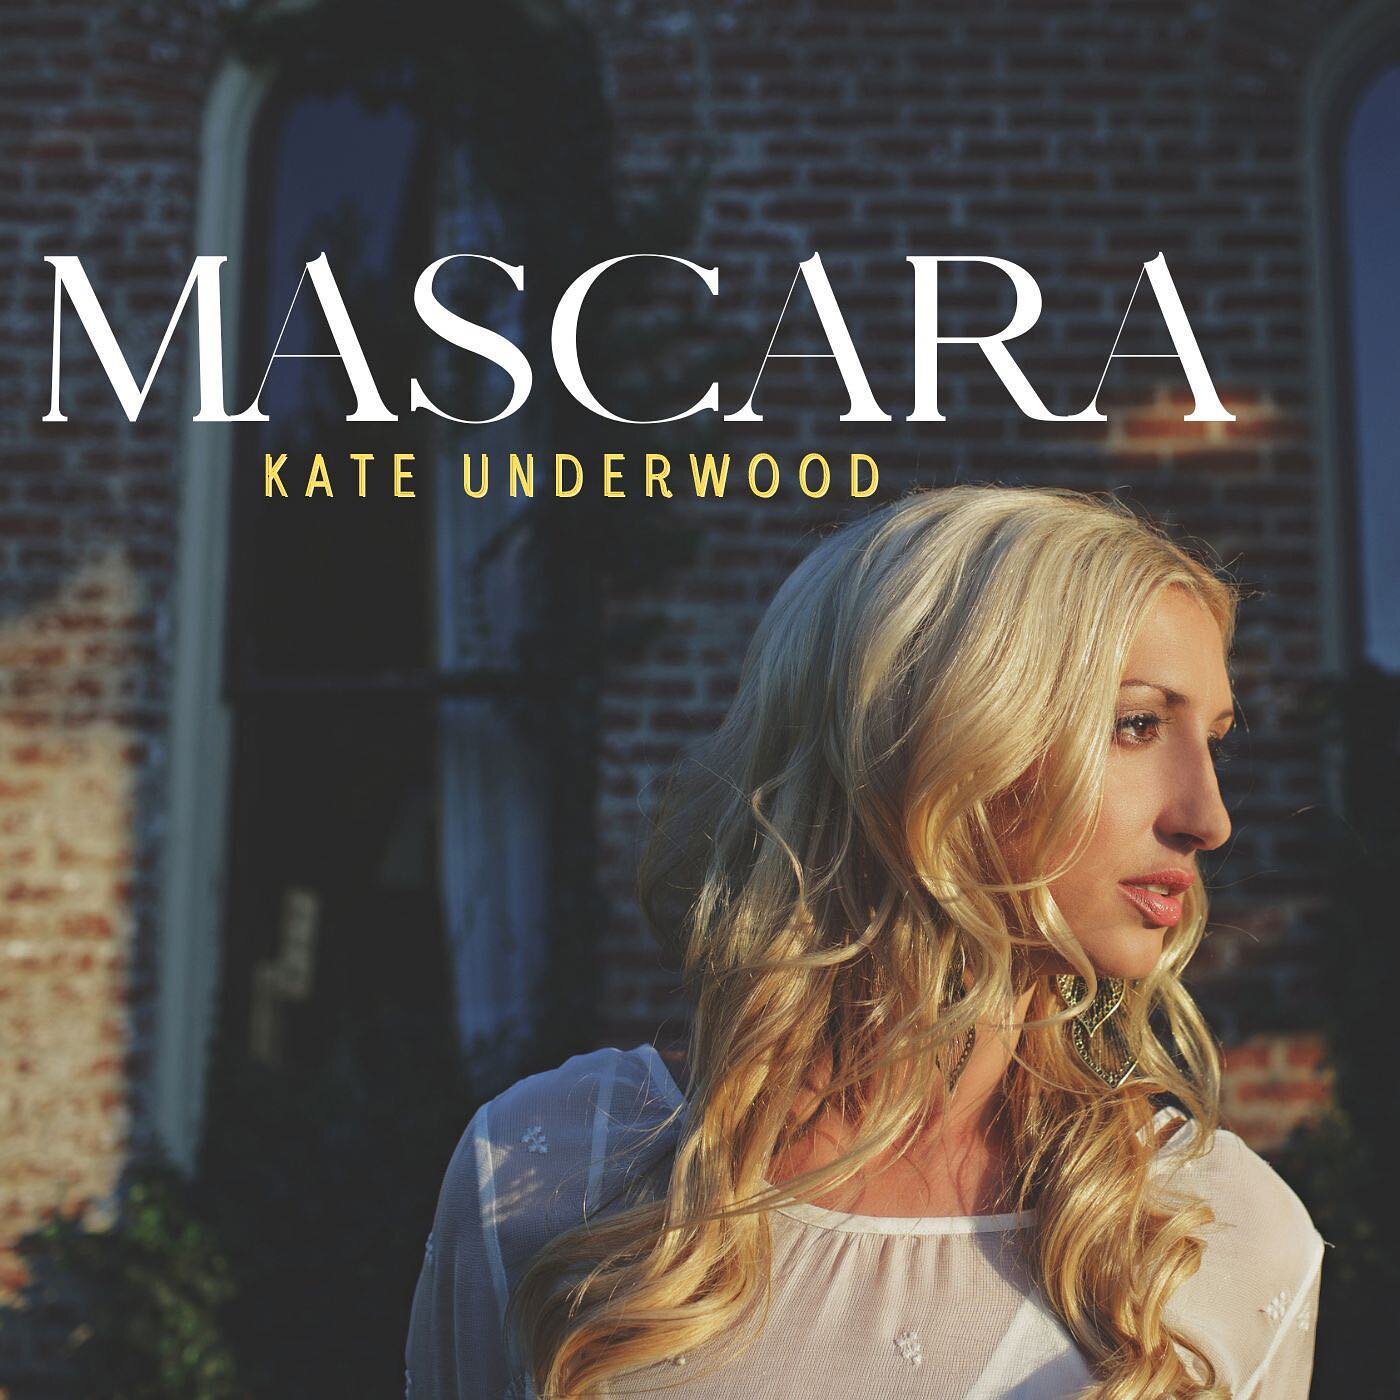 Mascara // Now streaming on Apple Music + Spotify + Anywhere else you stream your favorite tunes! 🎵

Lately I&rsquo;ve been thinking about some of my passions that I have put on the back burner. These passions use to be the driving force in my life.